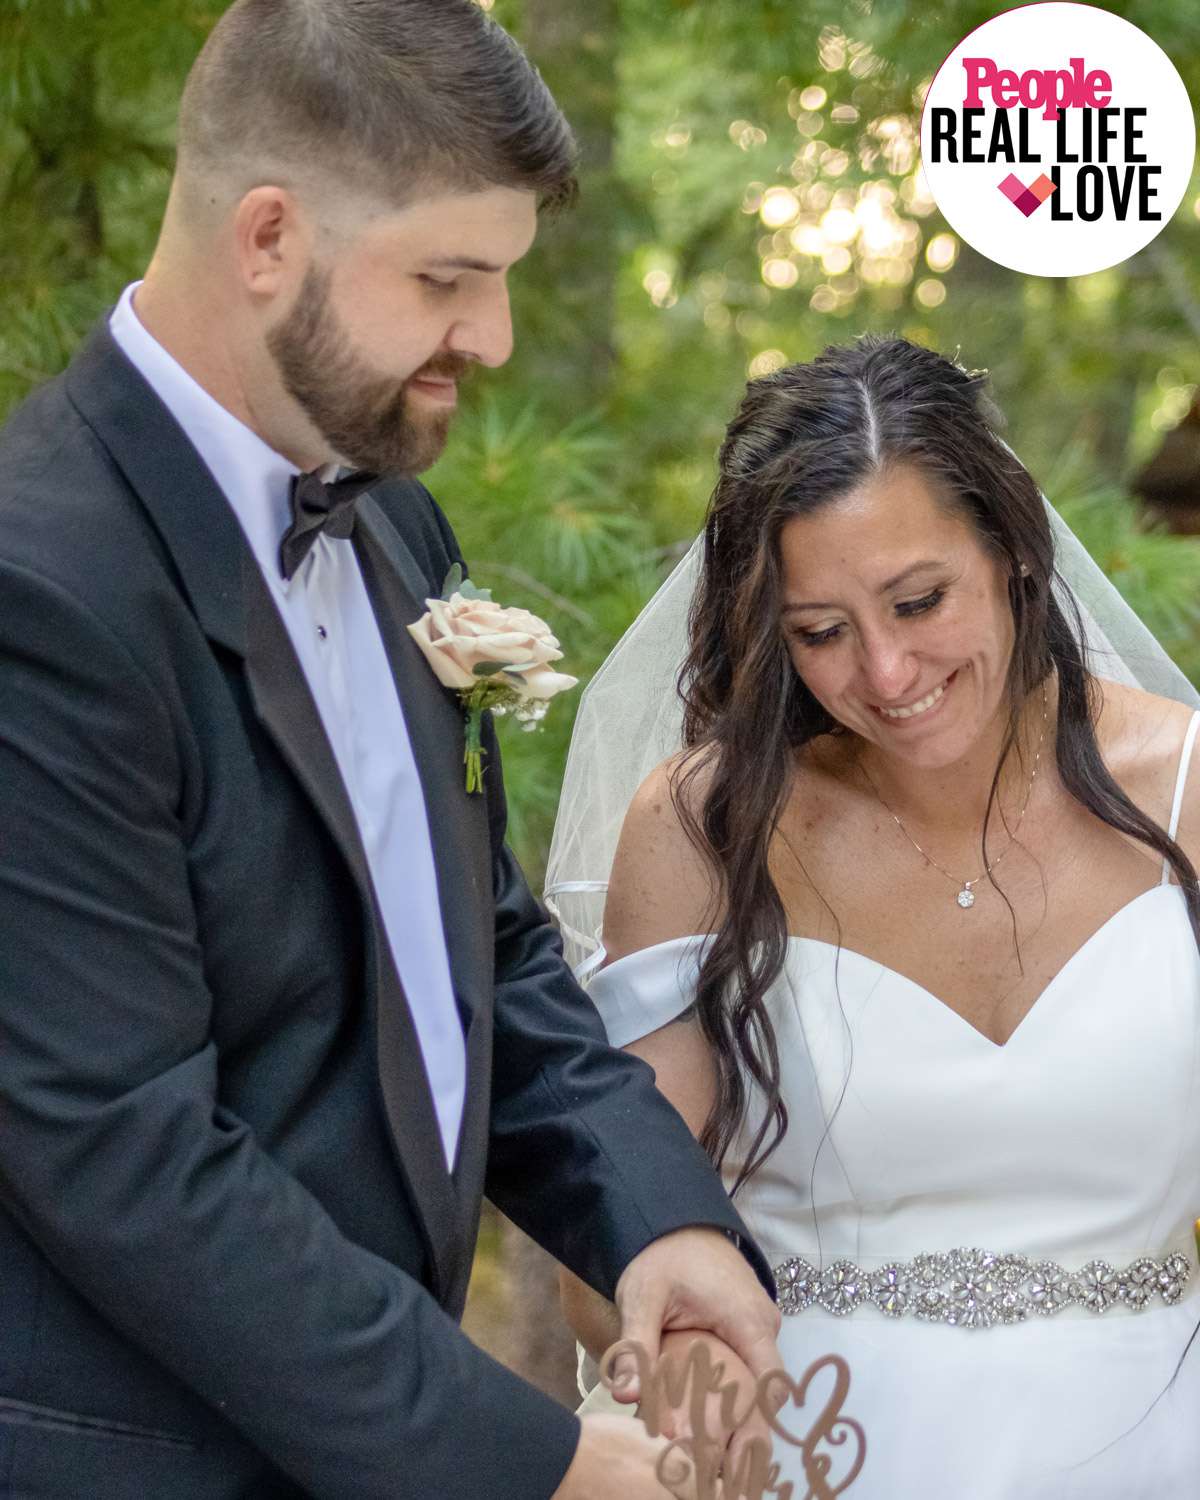 disabled Army veteran who was gifted a dream wedding before a life-threatening brain tumor surgery